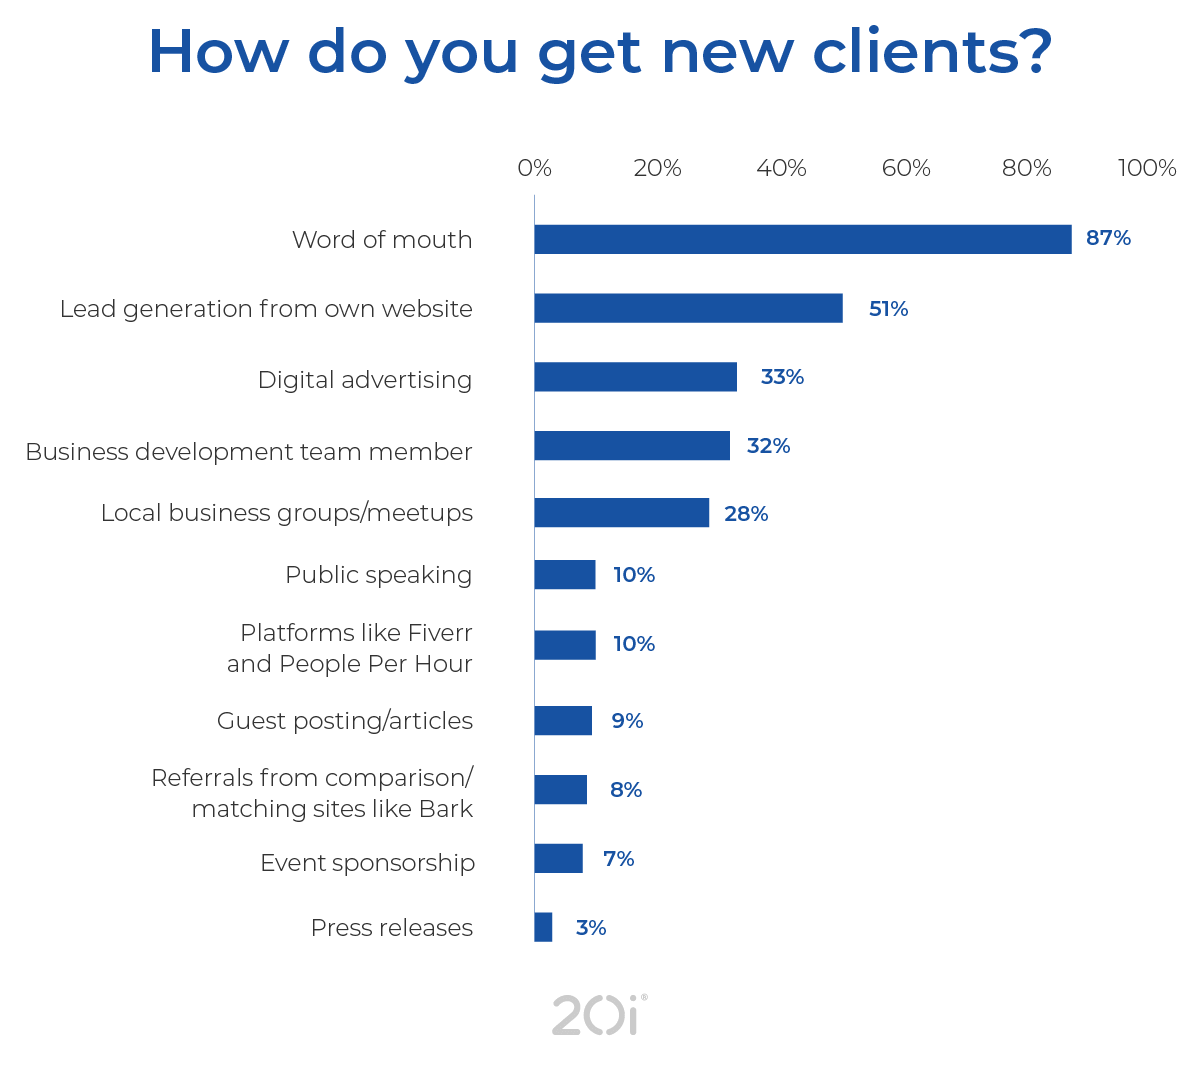 Survey results on how web designers get new clients.